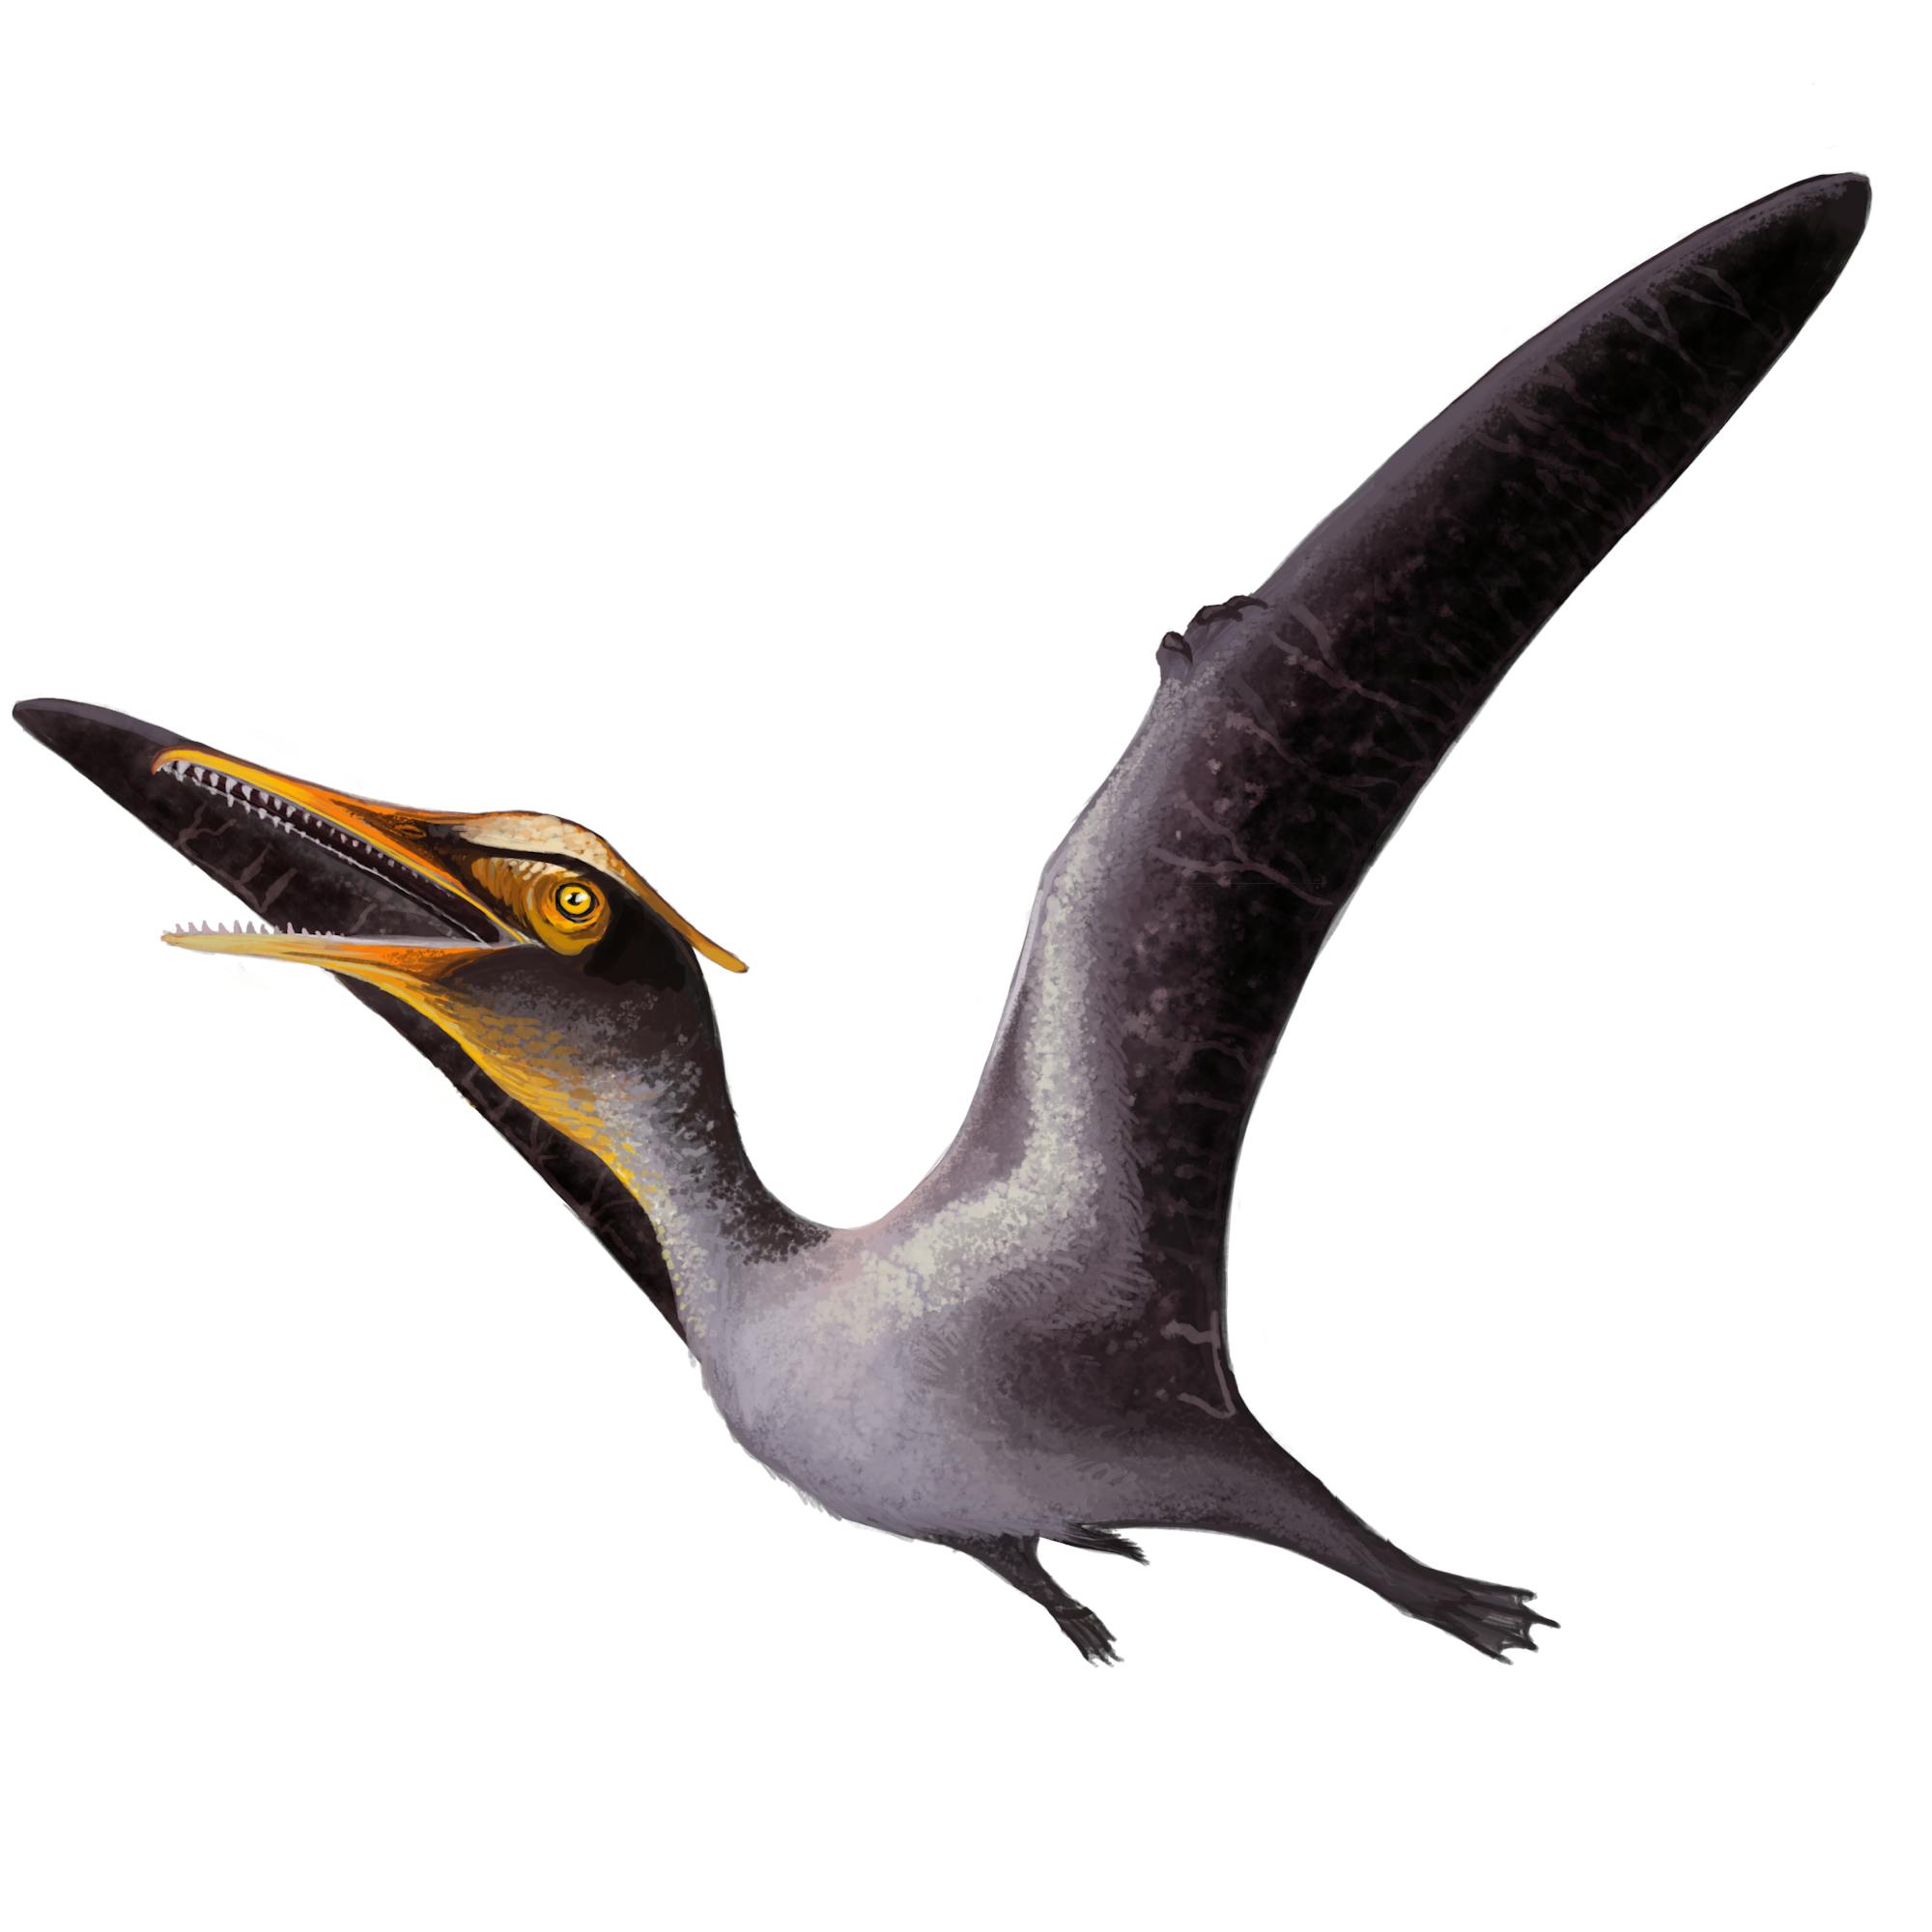 Species New to Science: [Paleontology • 2014] Aerodactylus scolopaciceps  gen. nov. • Pterodactylus scolopaciceps Meyer, 1860 (Pterosauria,  Pterodactyloidea) from the Upper Jurassic of Bavaria, Germany: The Problem  of Cryptic Pterosaur Taxa in Early